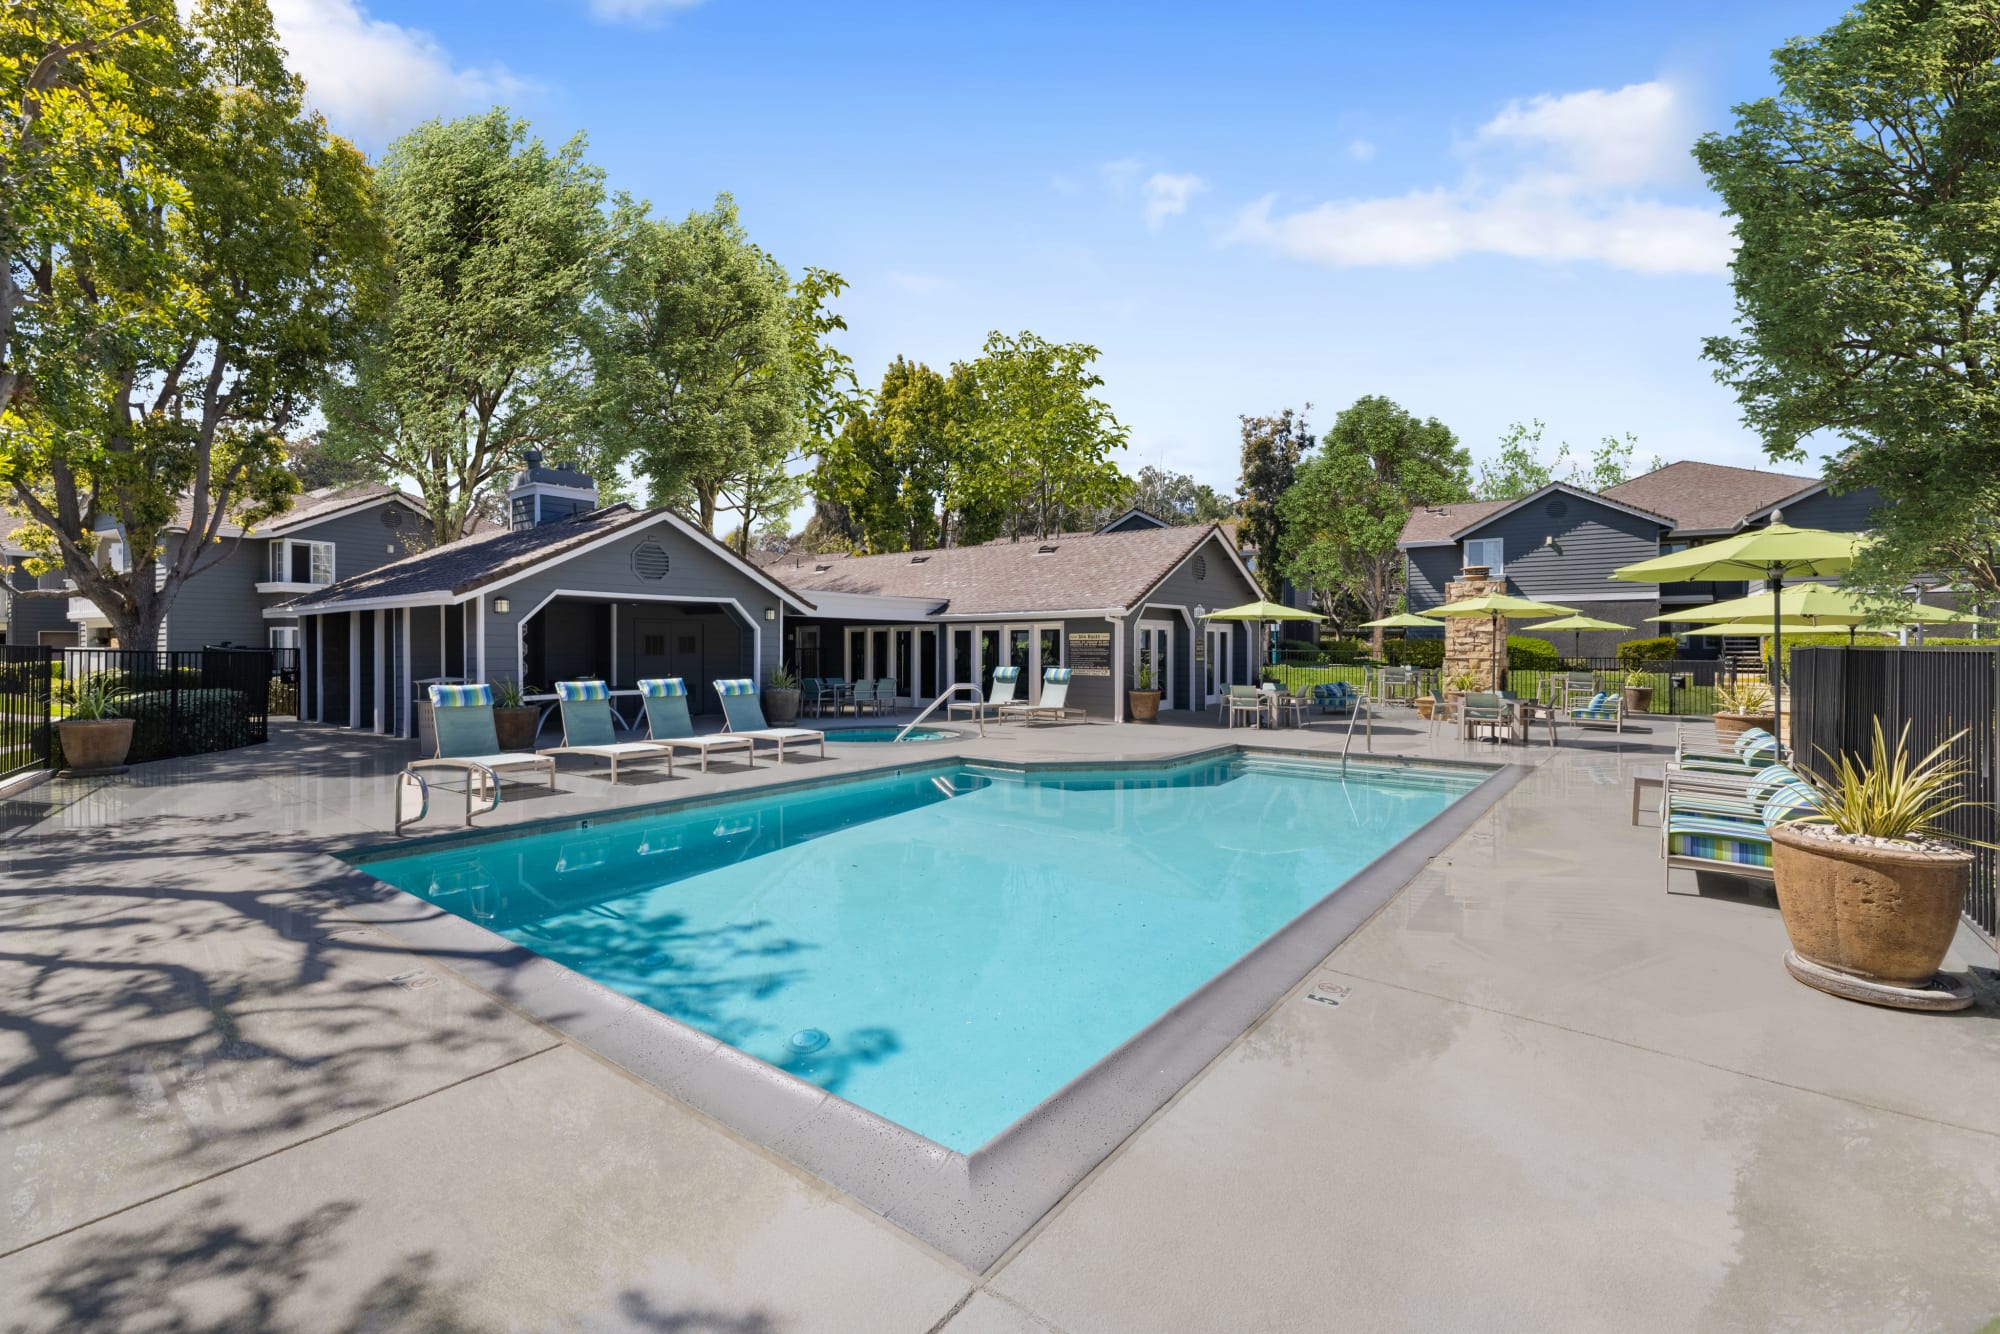 Second Pool with Fire-Pit, Ping Pong and BBQs at Village Oaks in Chino Hills, California